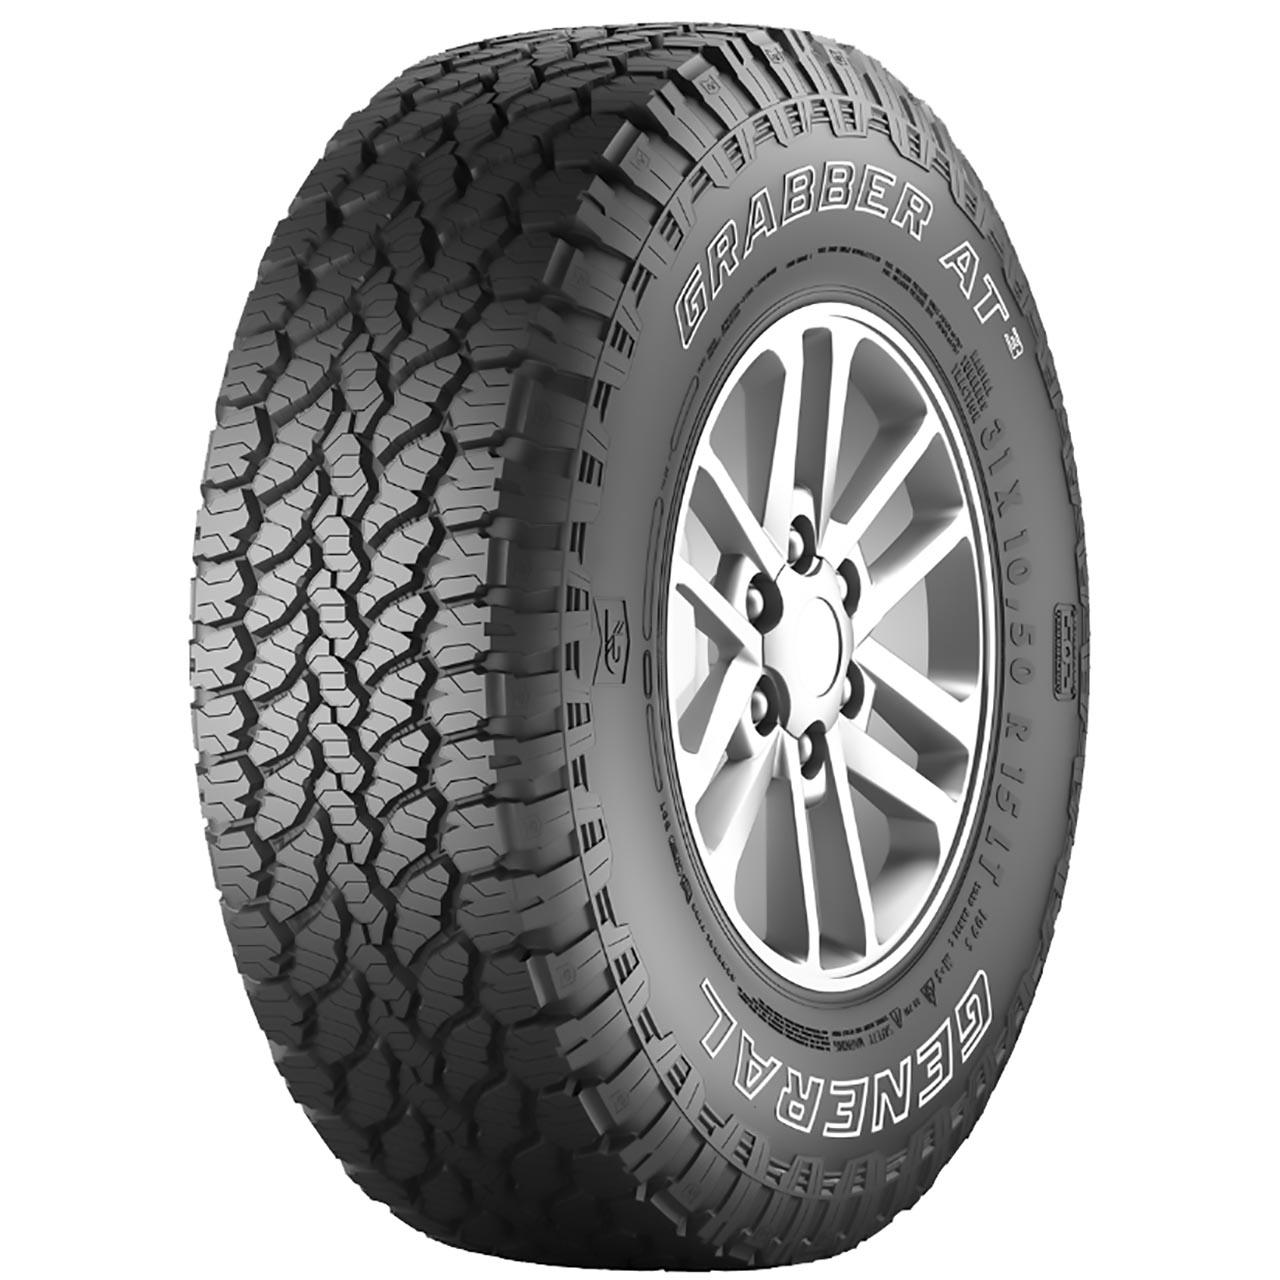 GENERAL TIRE GRABBER AT3 EVC OWL LRE 225/75 R16 115/112S  TL M+S 3PMSF